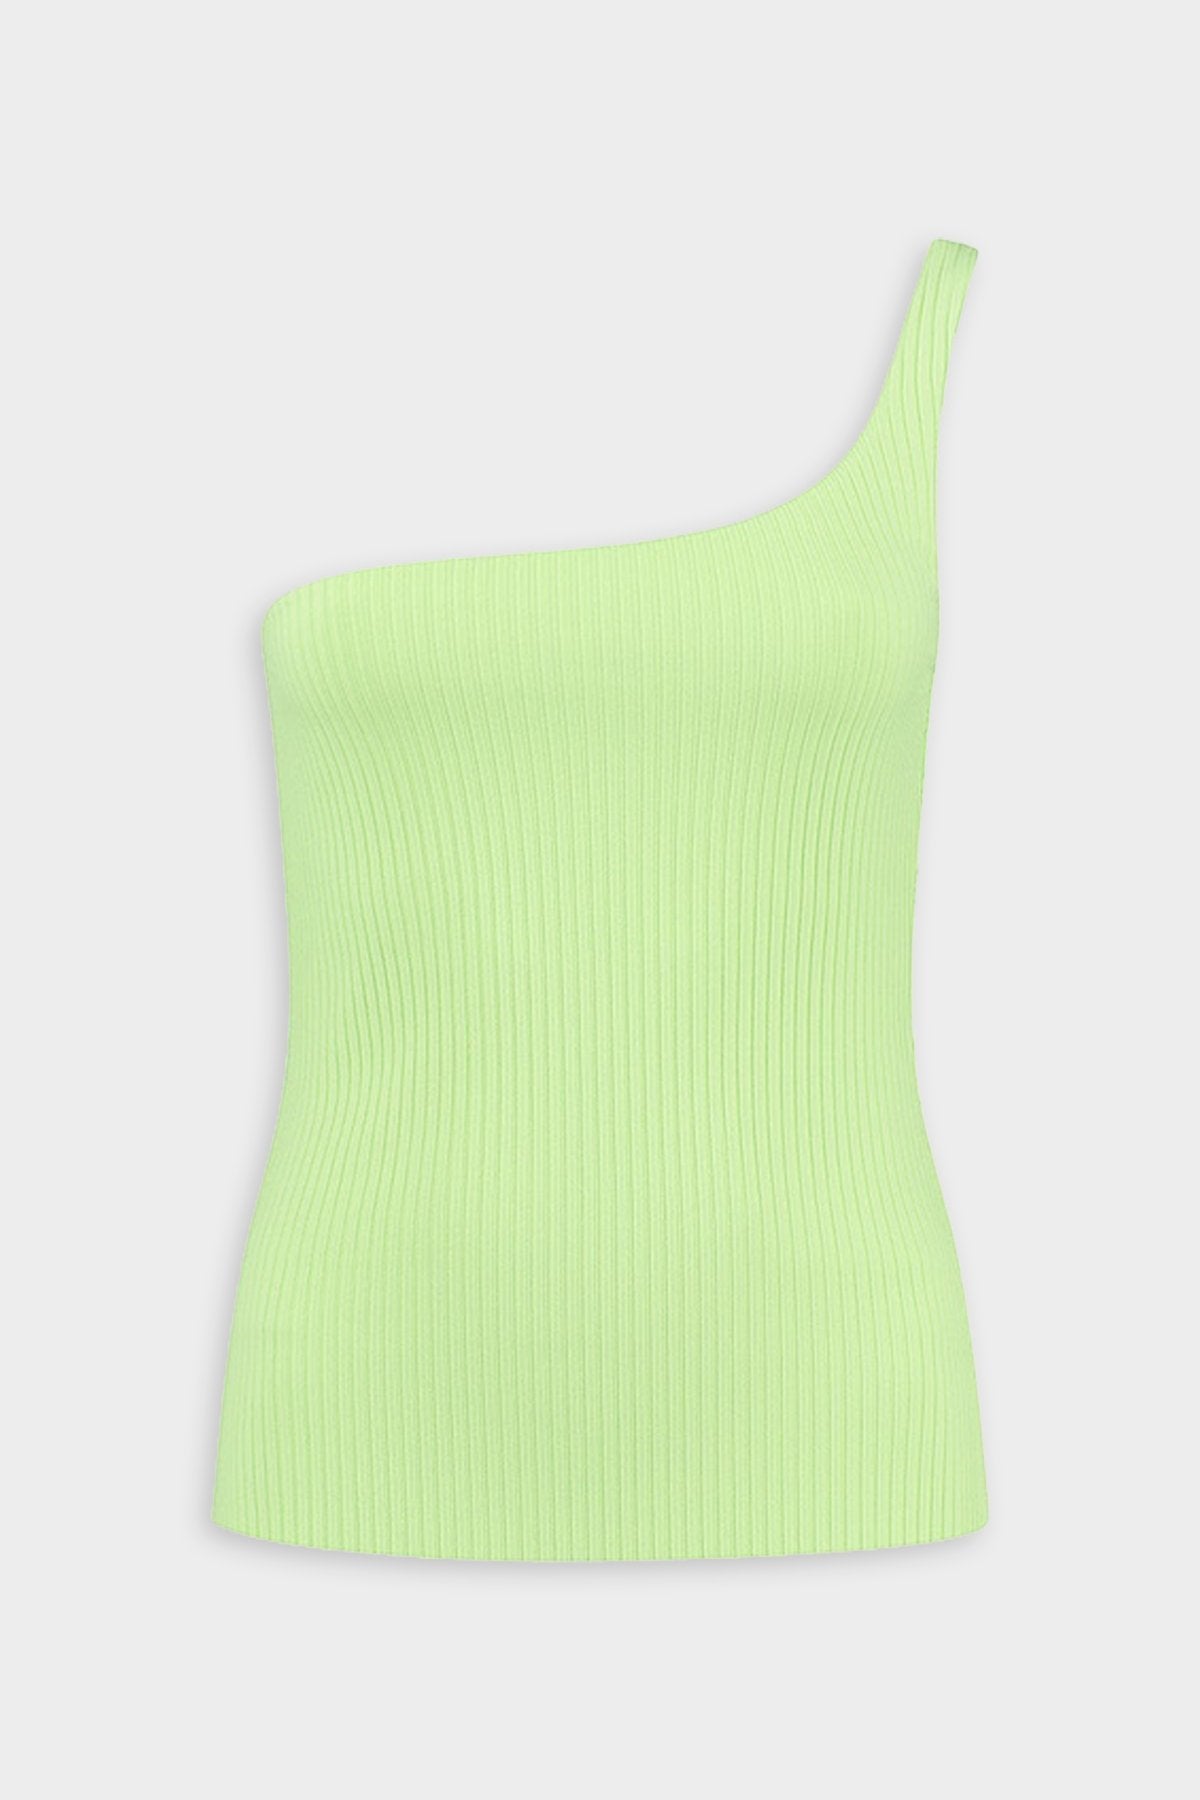 Chize One-Shoulder Knit Ribbed Top in Pistachio - shop-olivia.com